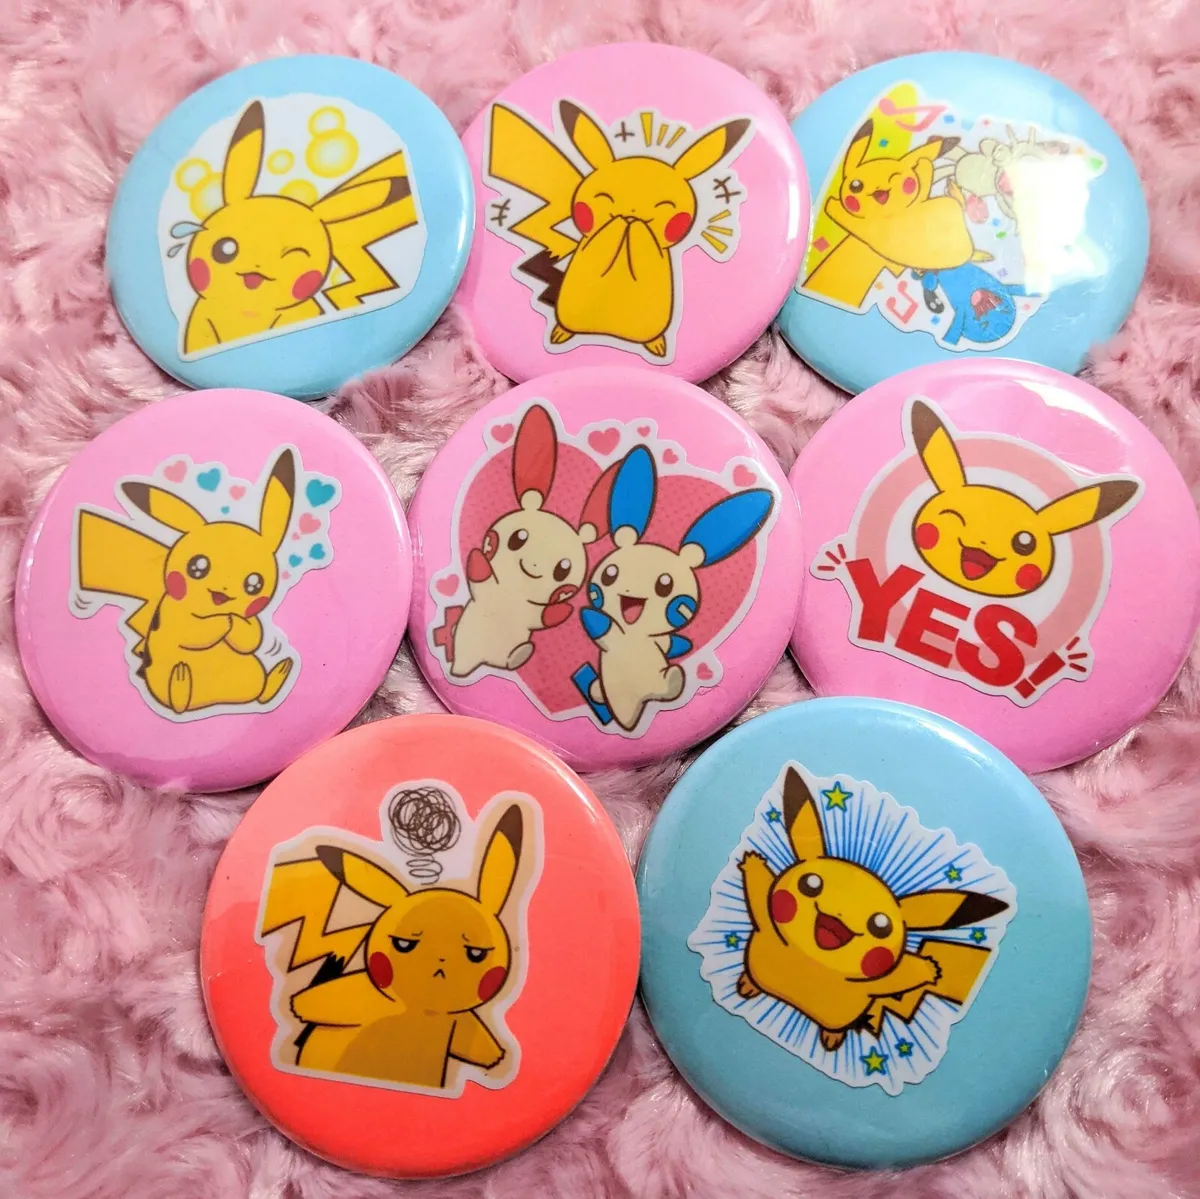 Kawaii Pokémon Pins Magnets Keychains or Mirrors - 2.25 inch size badge  pins